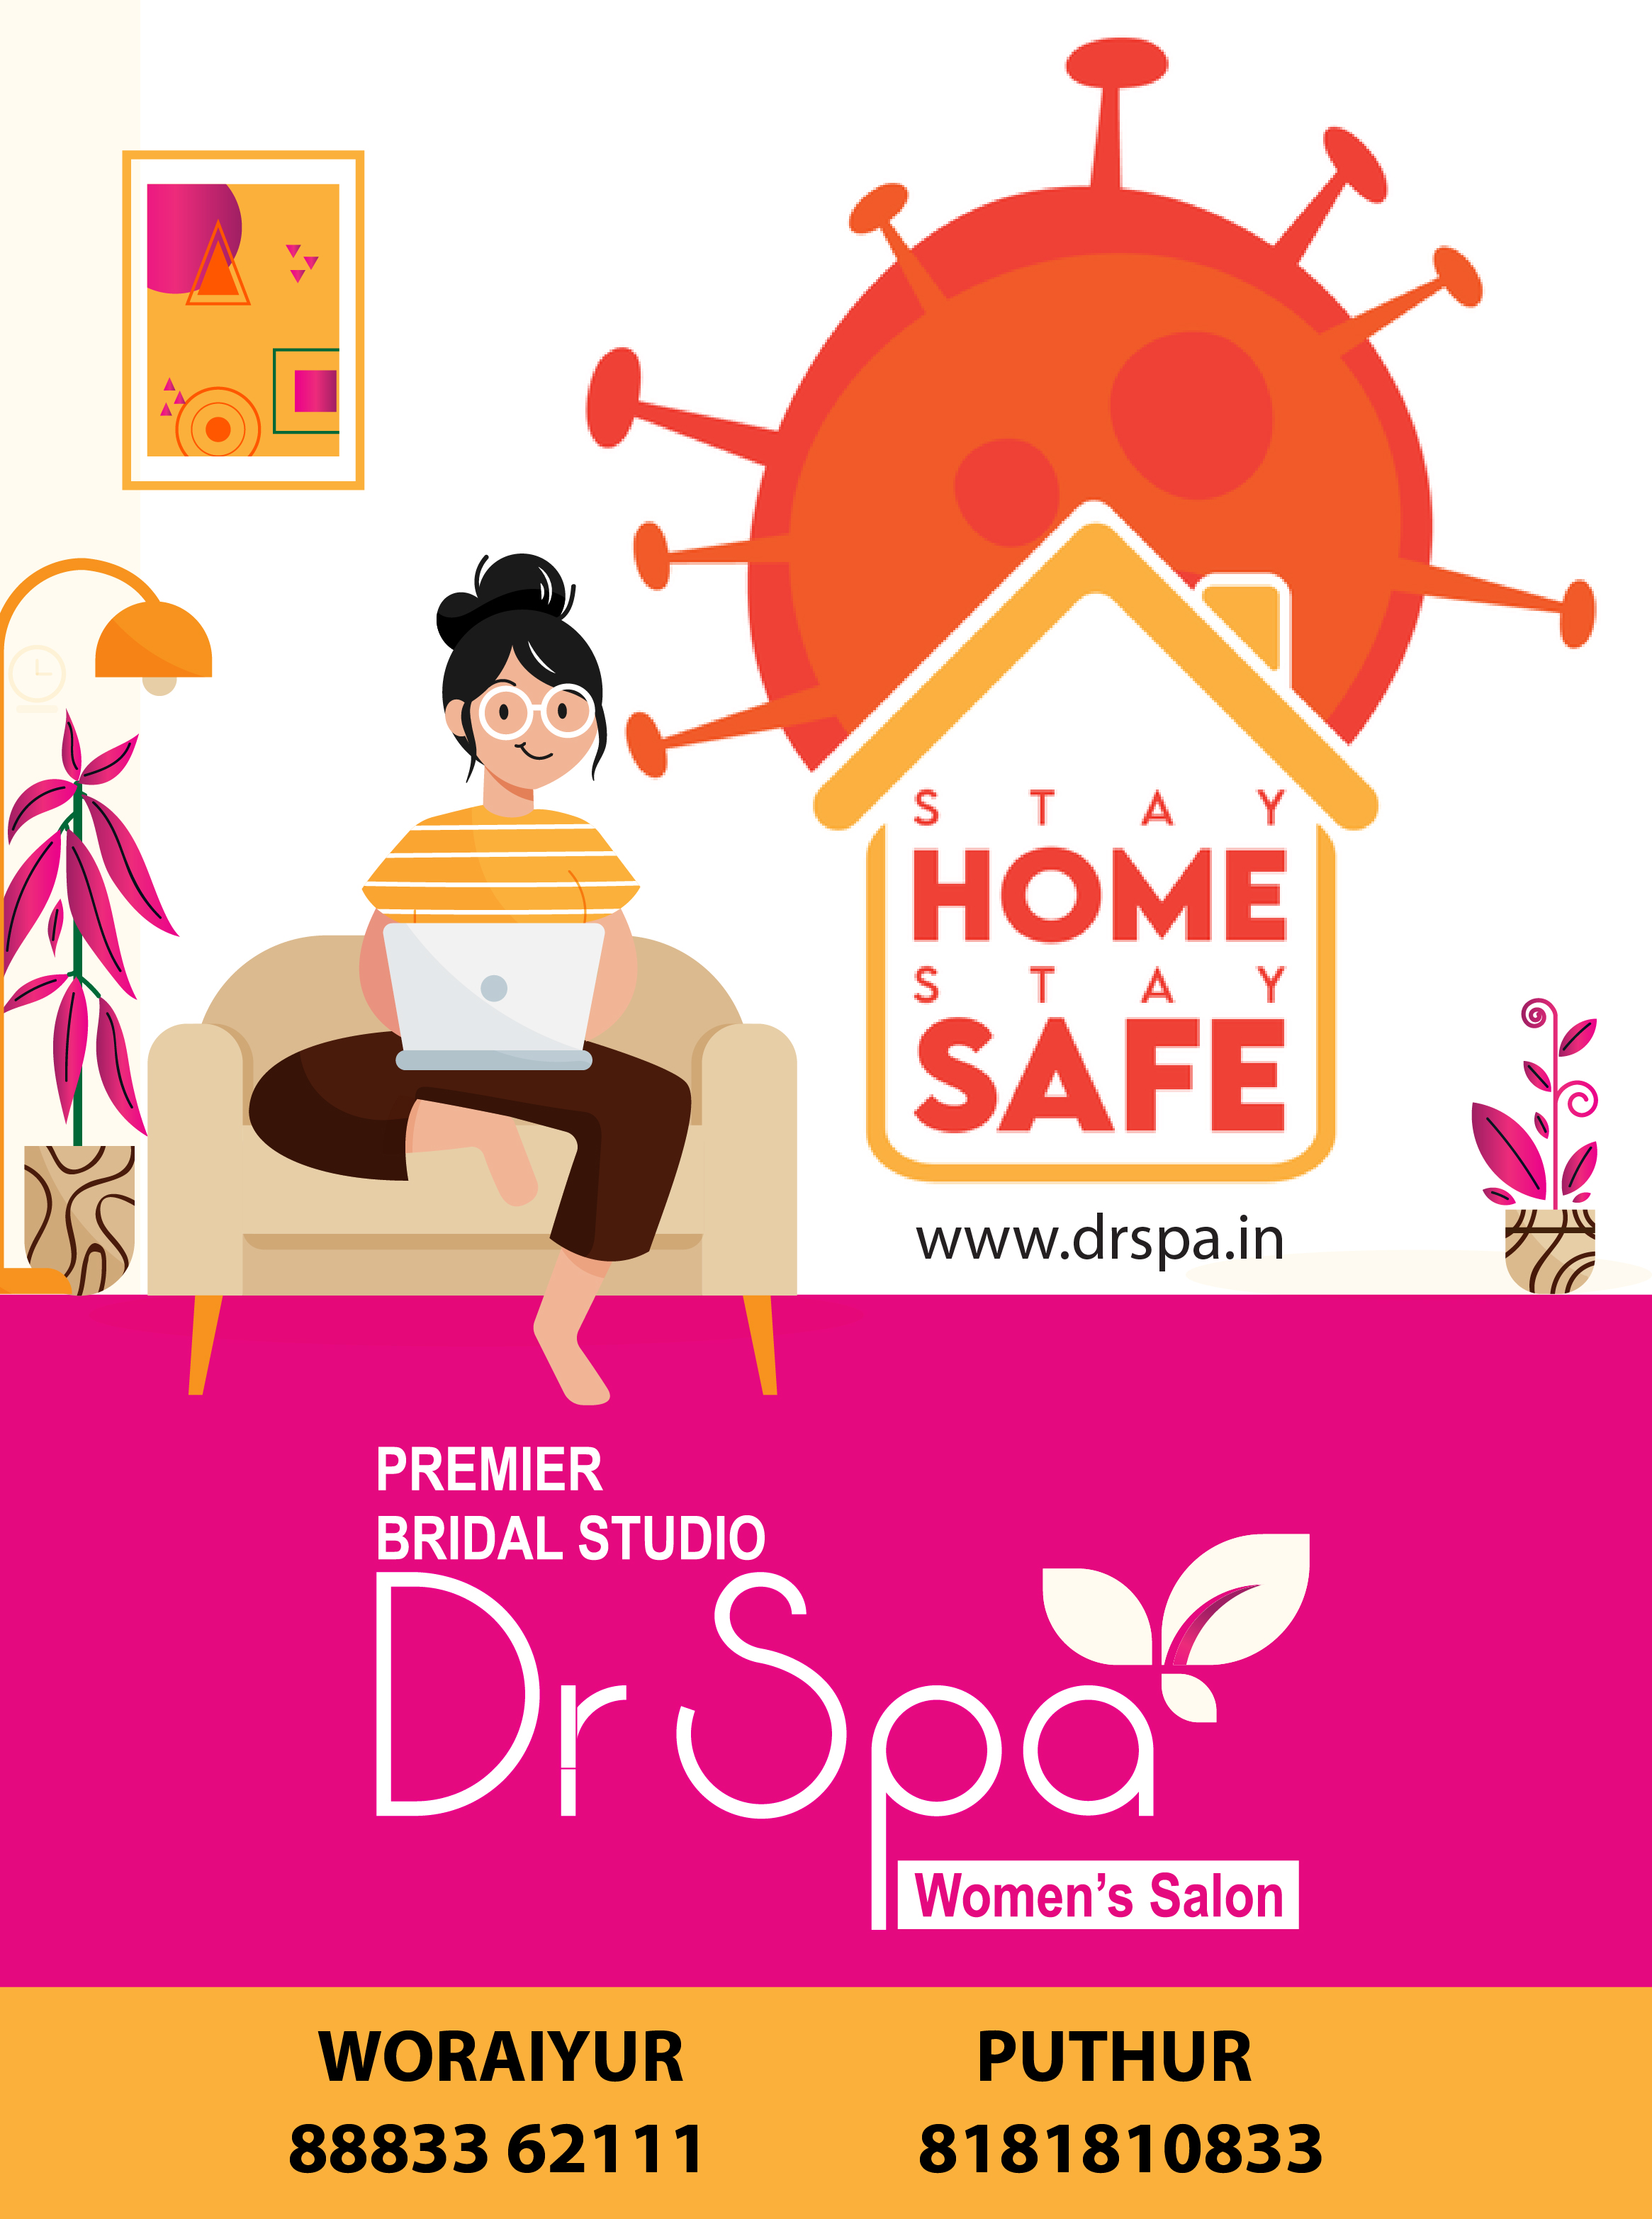 STOP CORONO VIRUS - Stay home Stay Safe